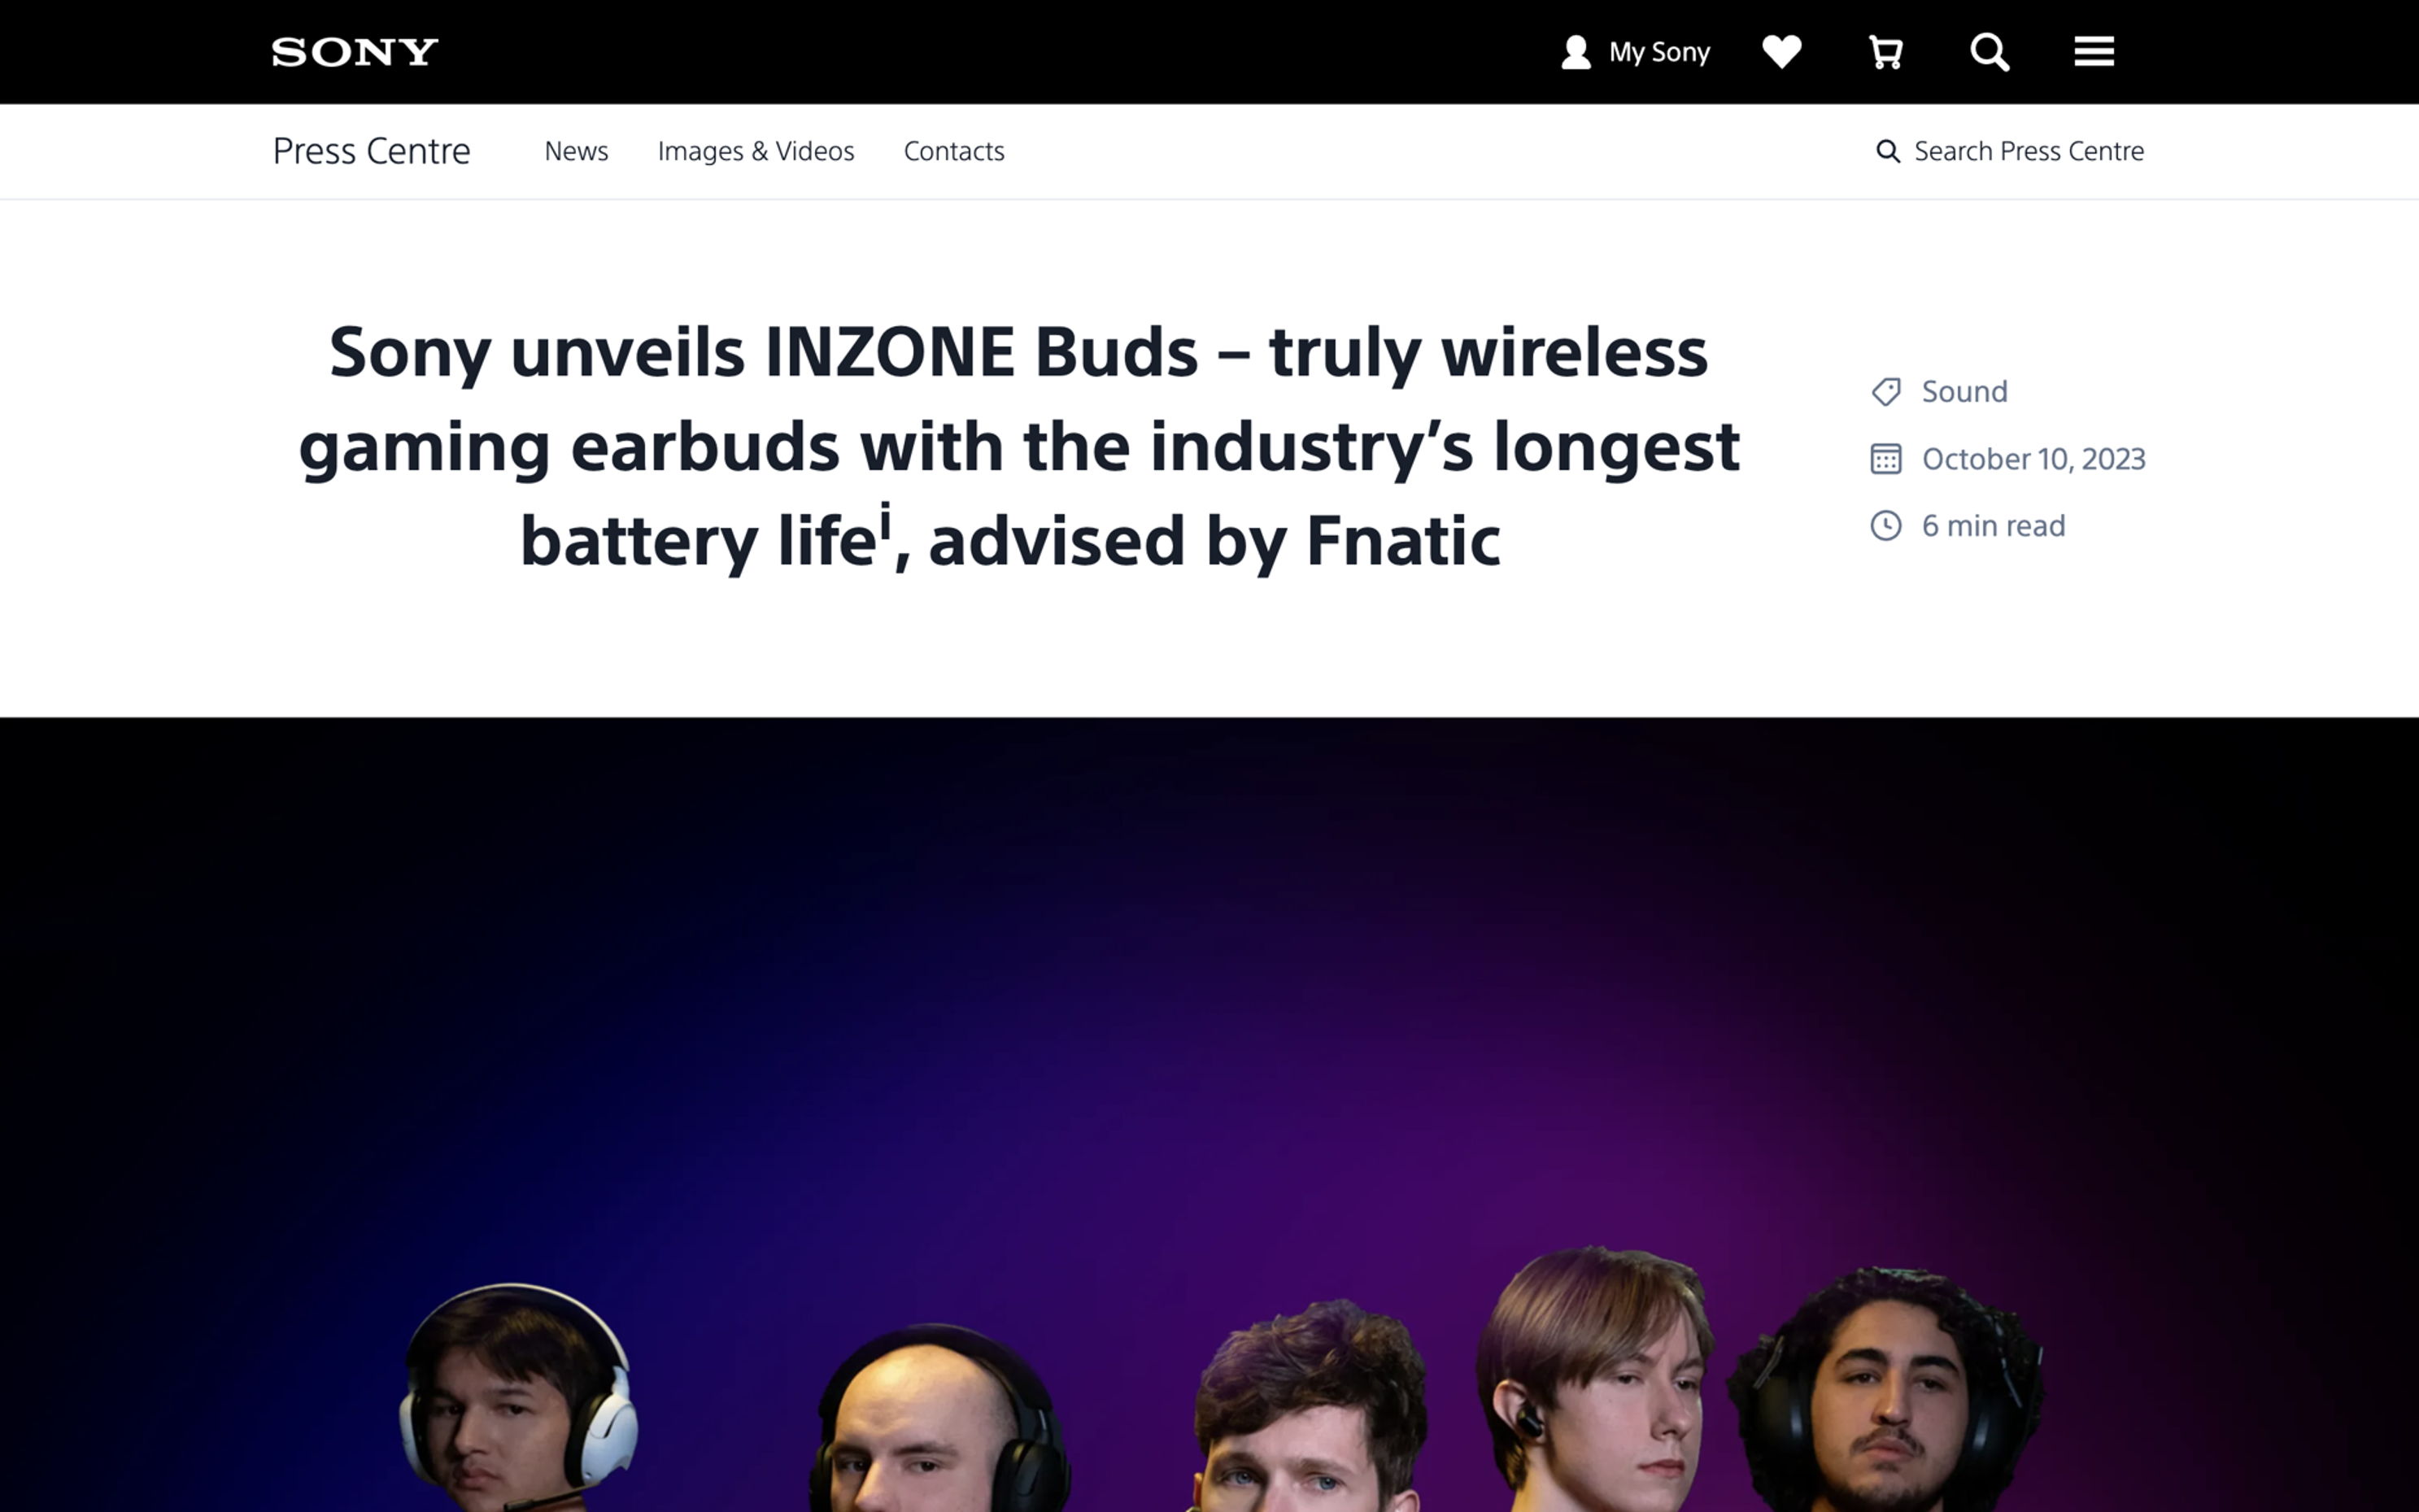 Sony unveils INZONE Buds – truly wireless gaming earbuds with the industry’s longest battery lifei, advised by Fnatic 